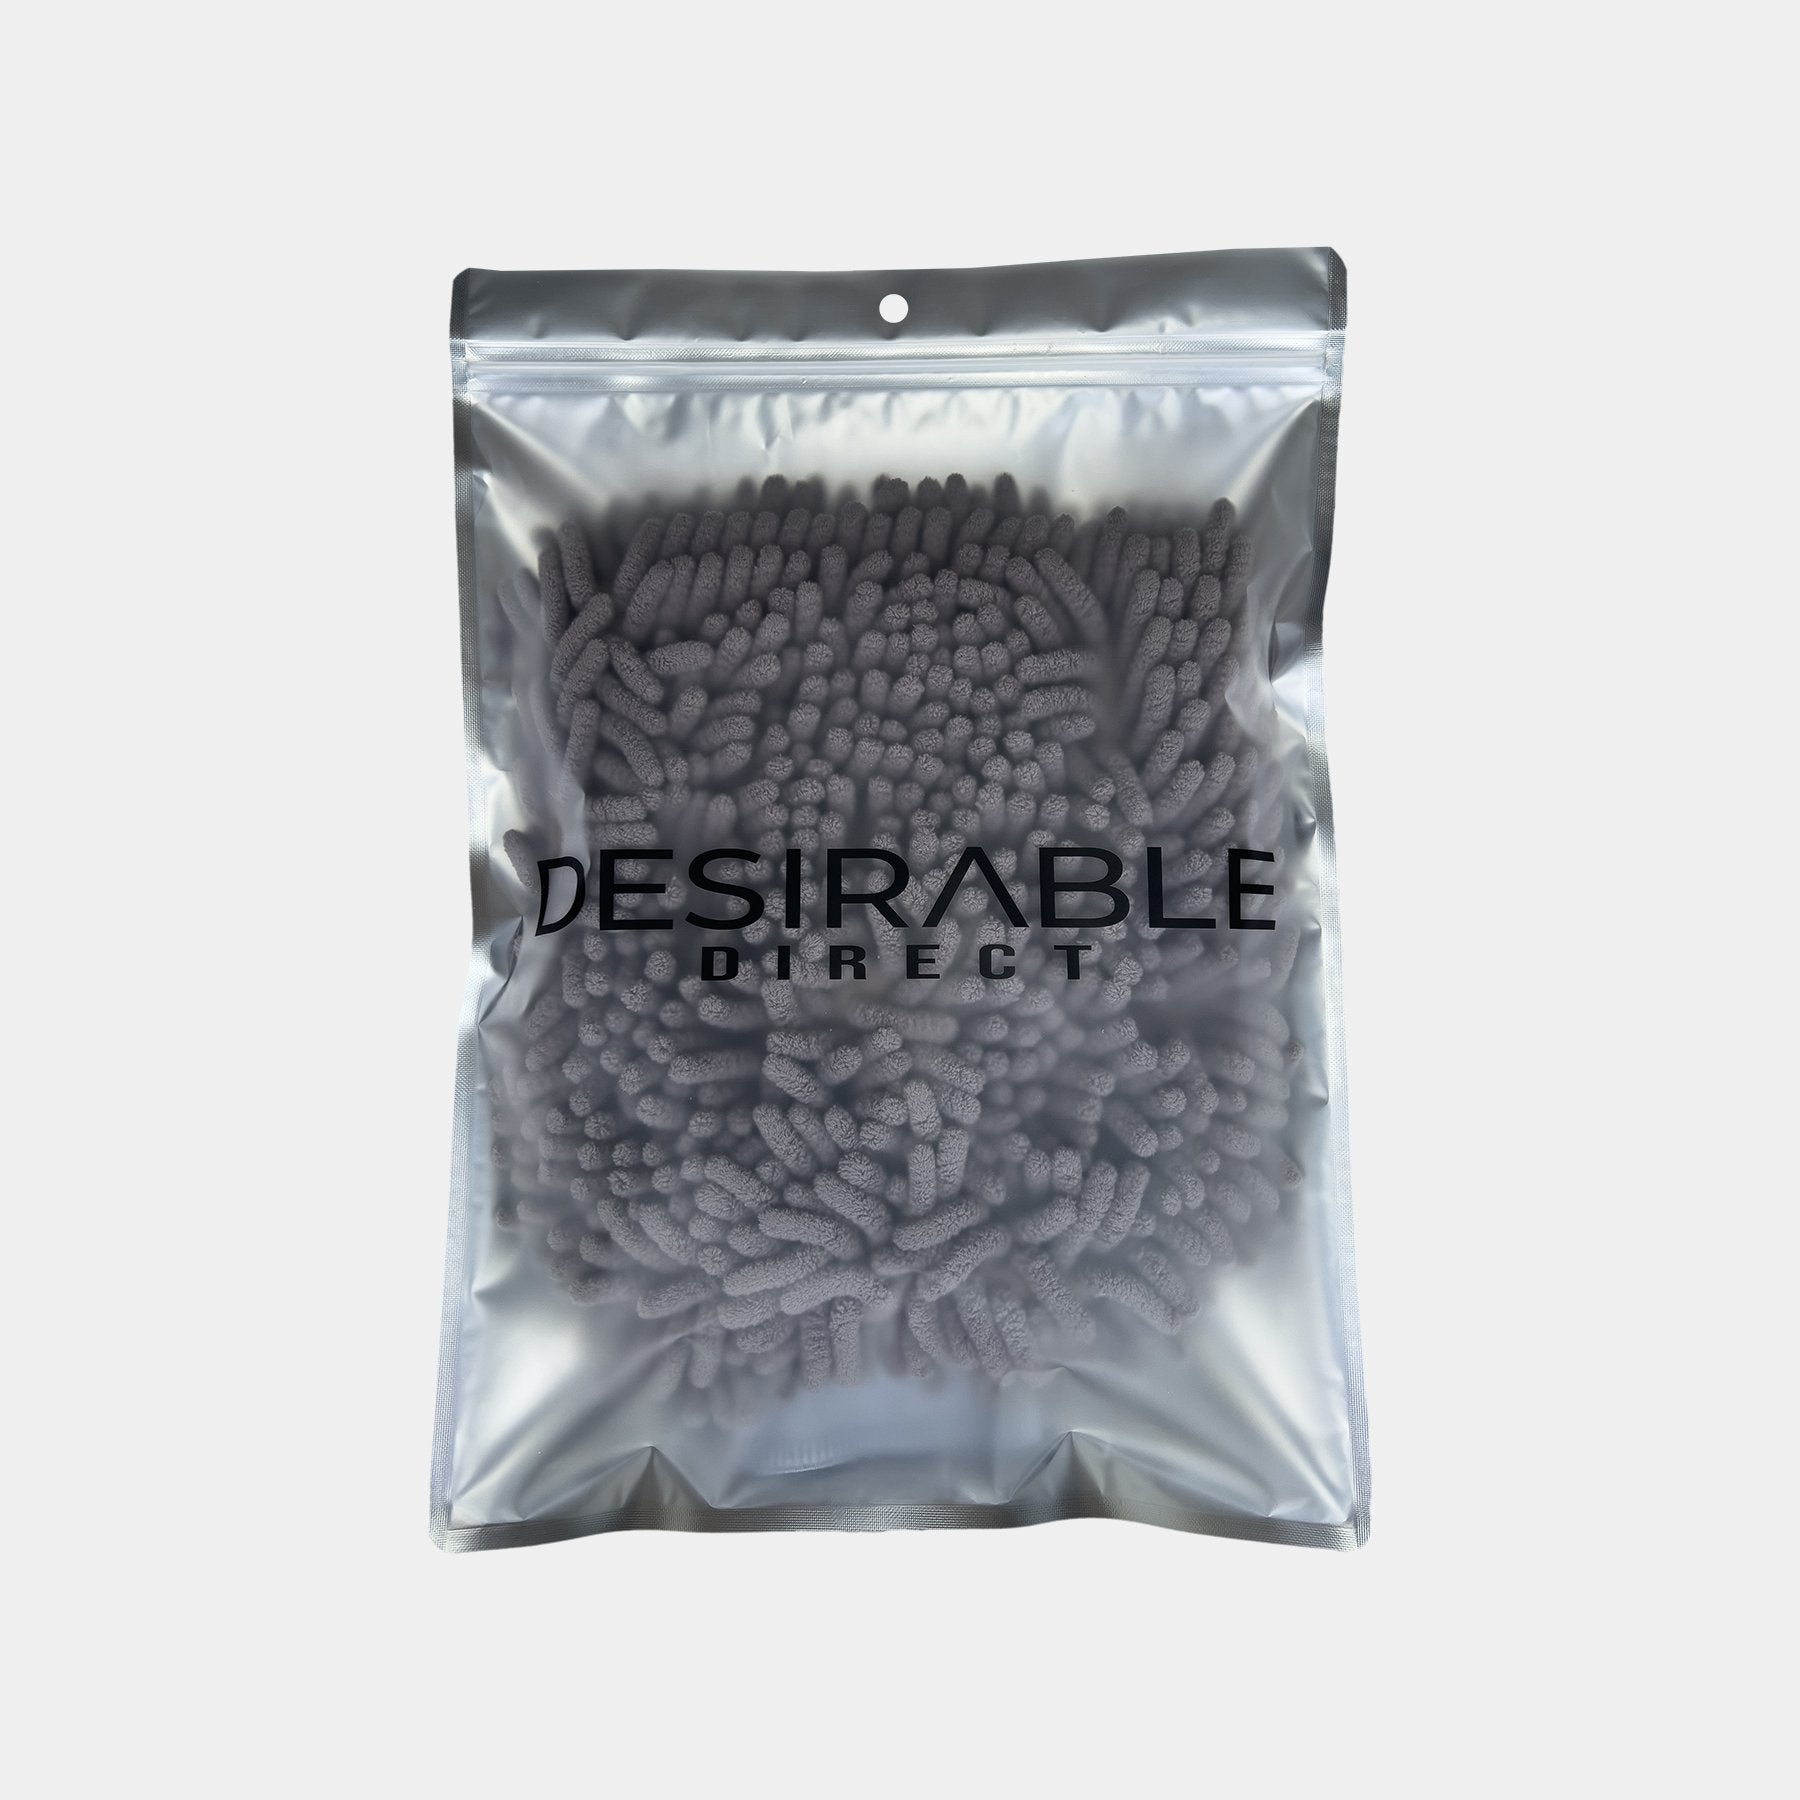 Car care noodle chenille grey wash mitt displayed on a white background in silver packaging with desirable direct printed on the front to keep the item clean when not in use.